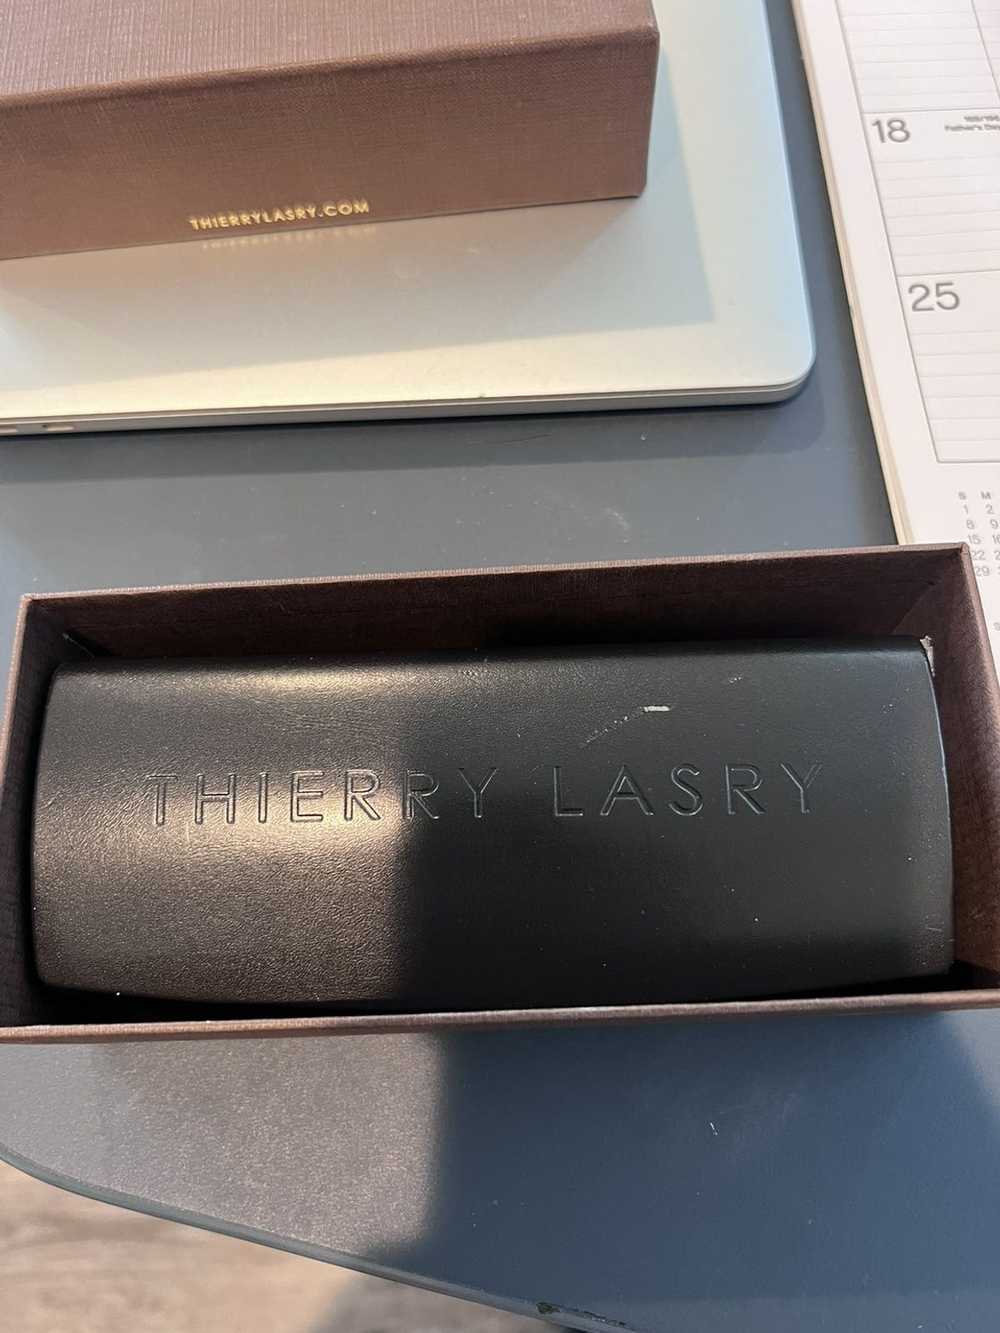 Thierry Lasry Thierry Lasry Sunglasses - image 6